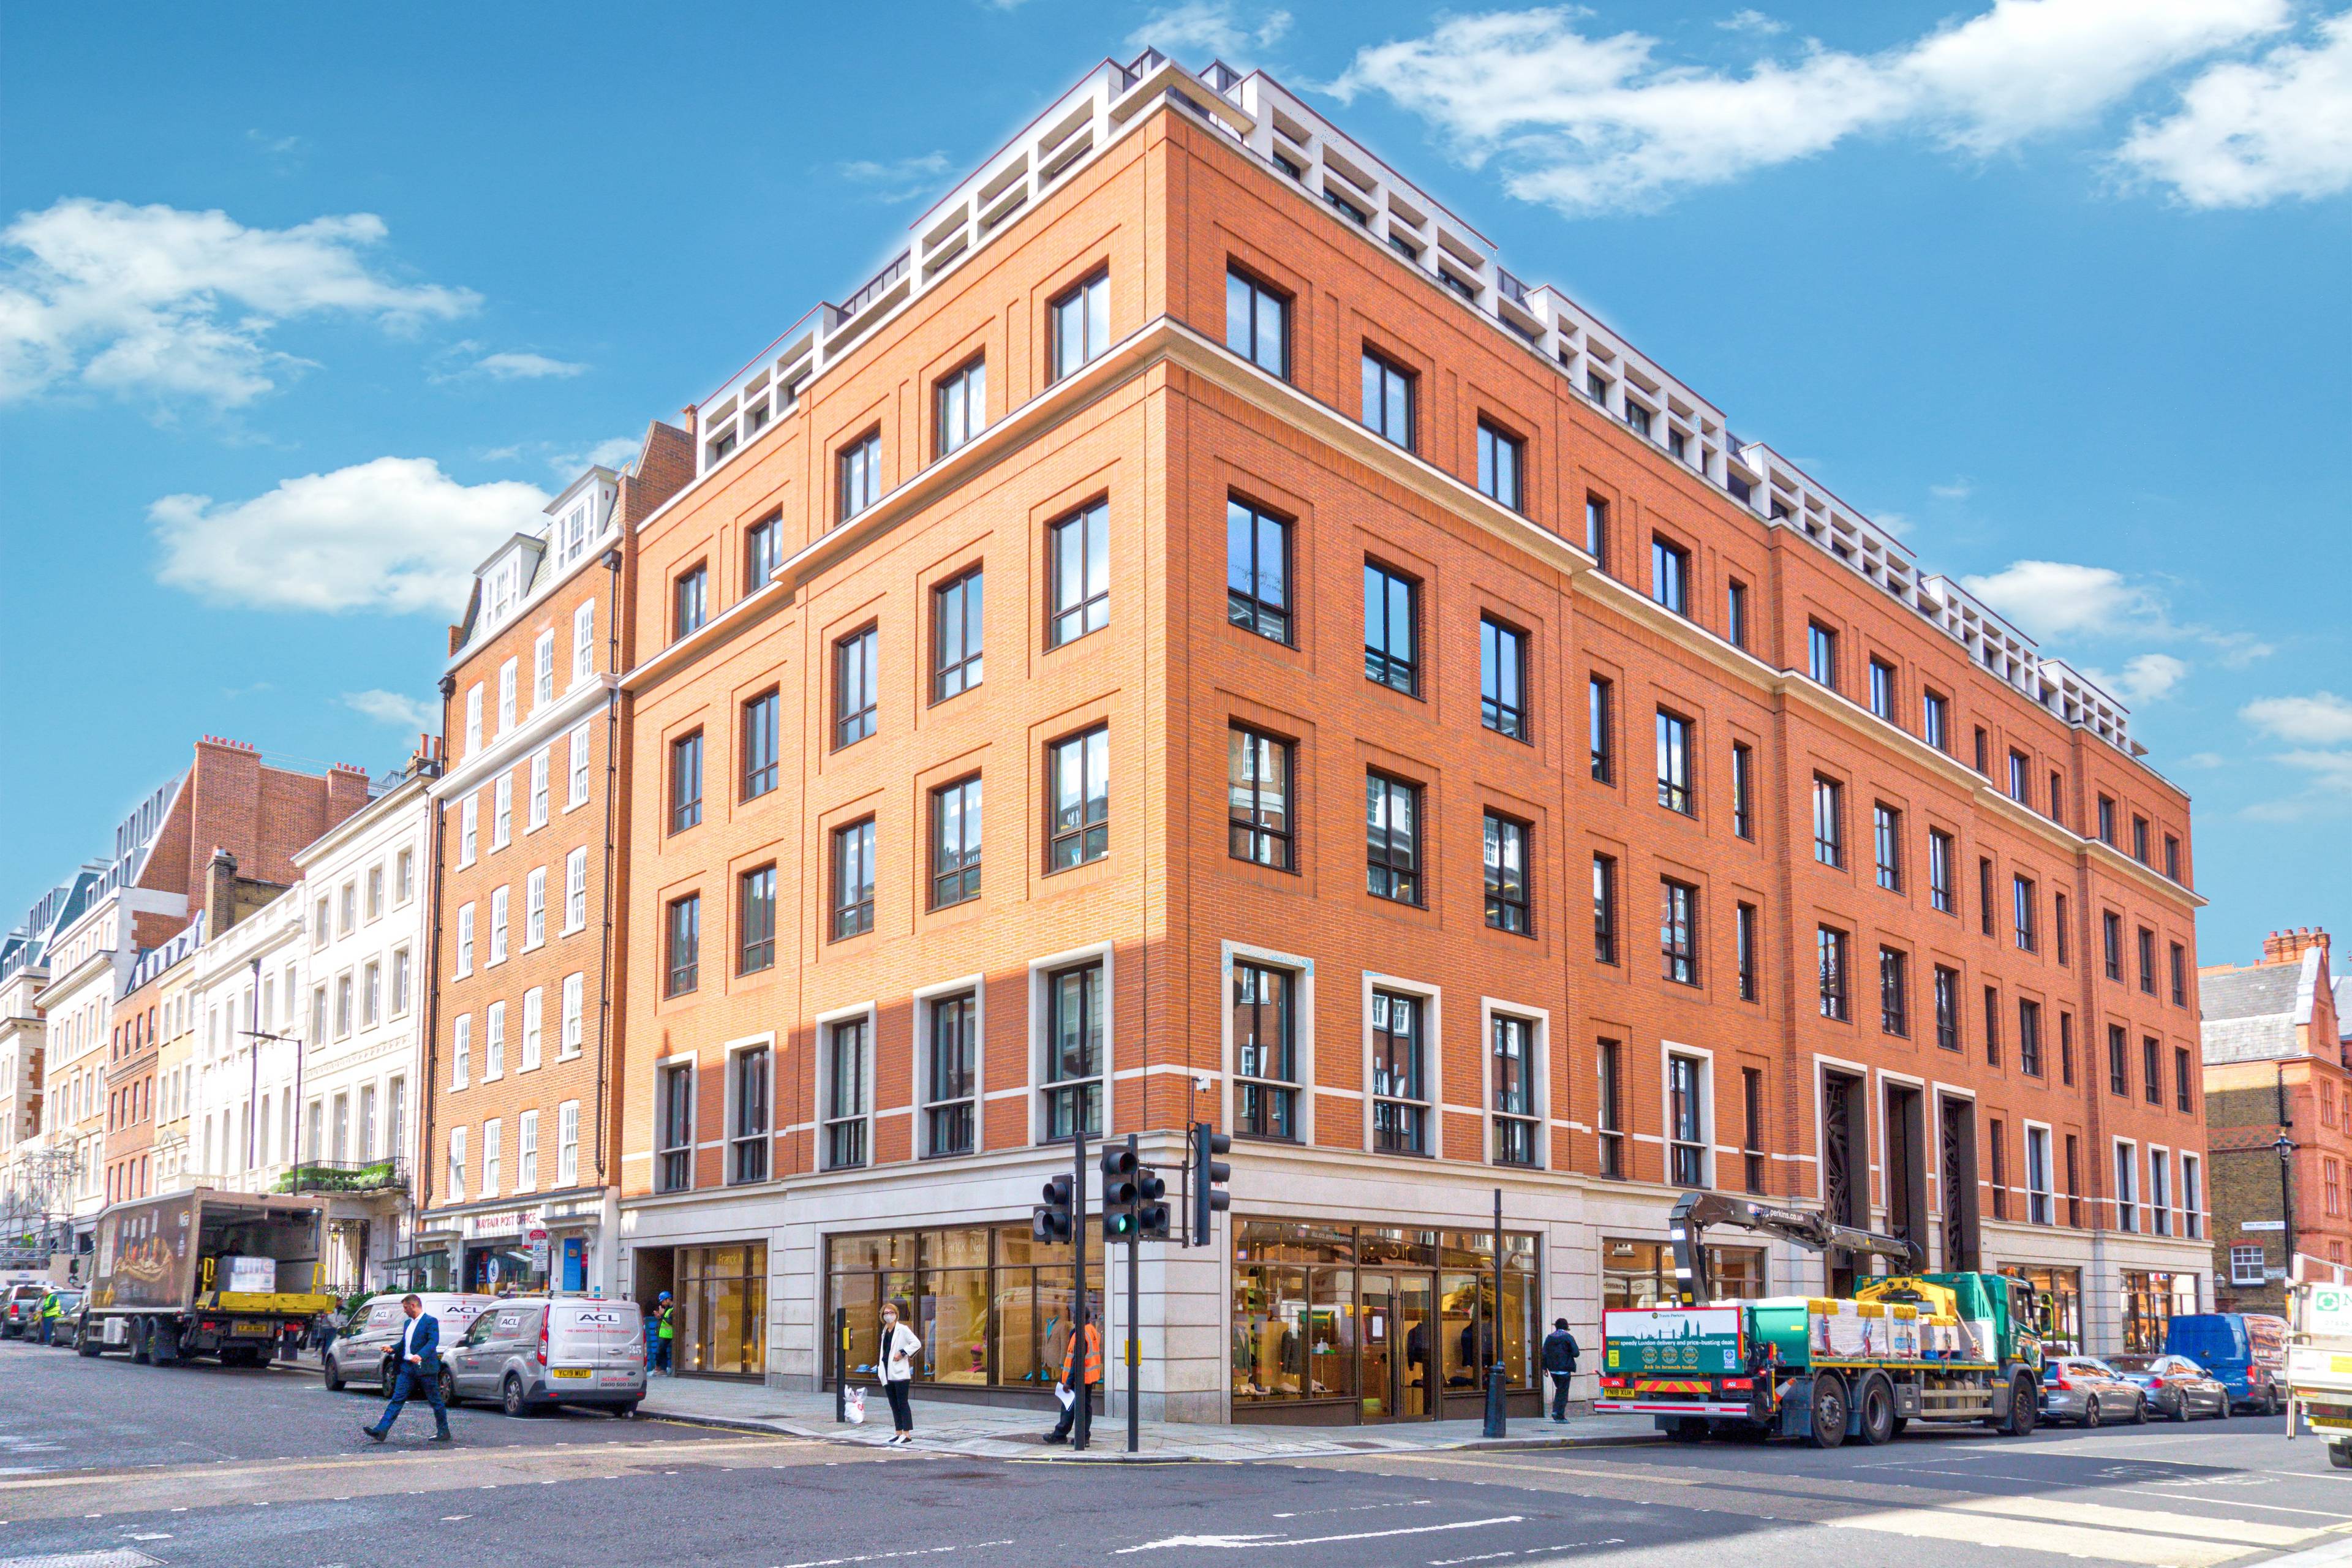 A bright one-bedroom apartment situated on Grosvenor Street, in the heart of Mayfair. The apartment is set on the 2nd of a charming period building and benefits from a porter and lift service.